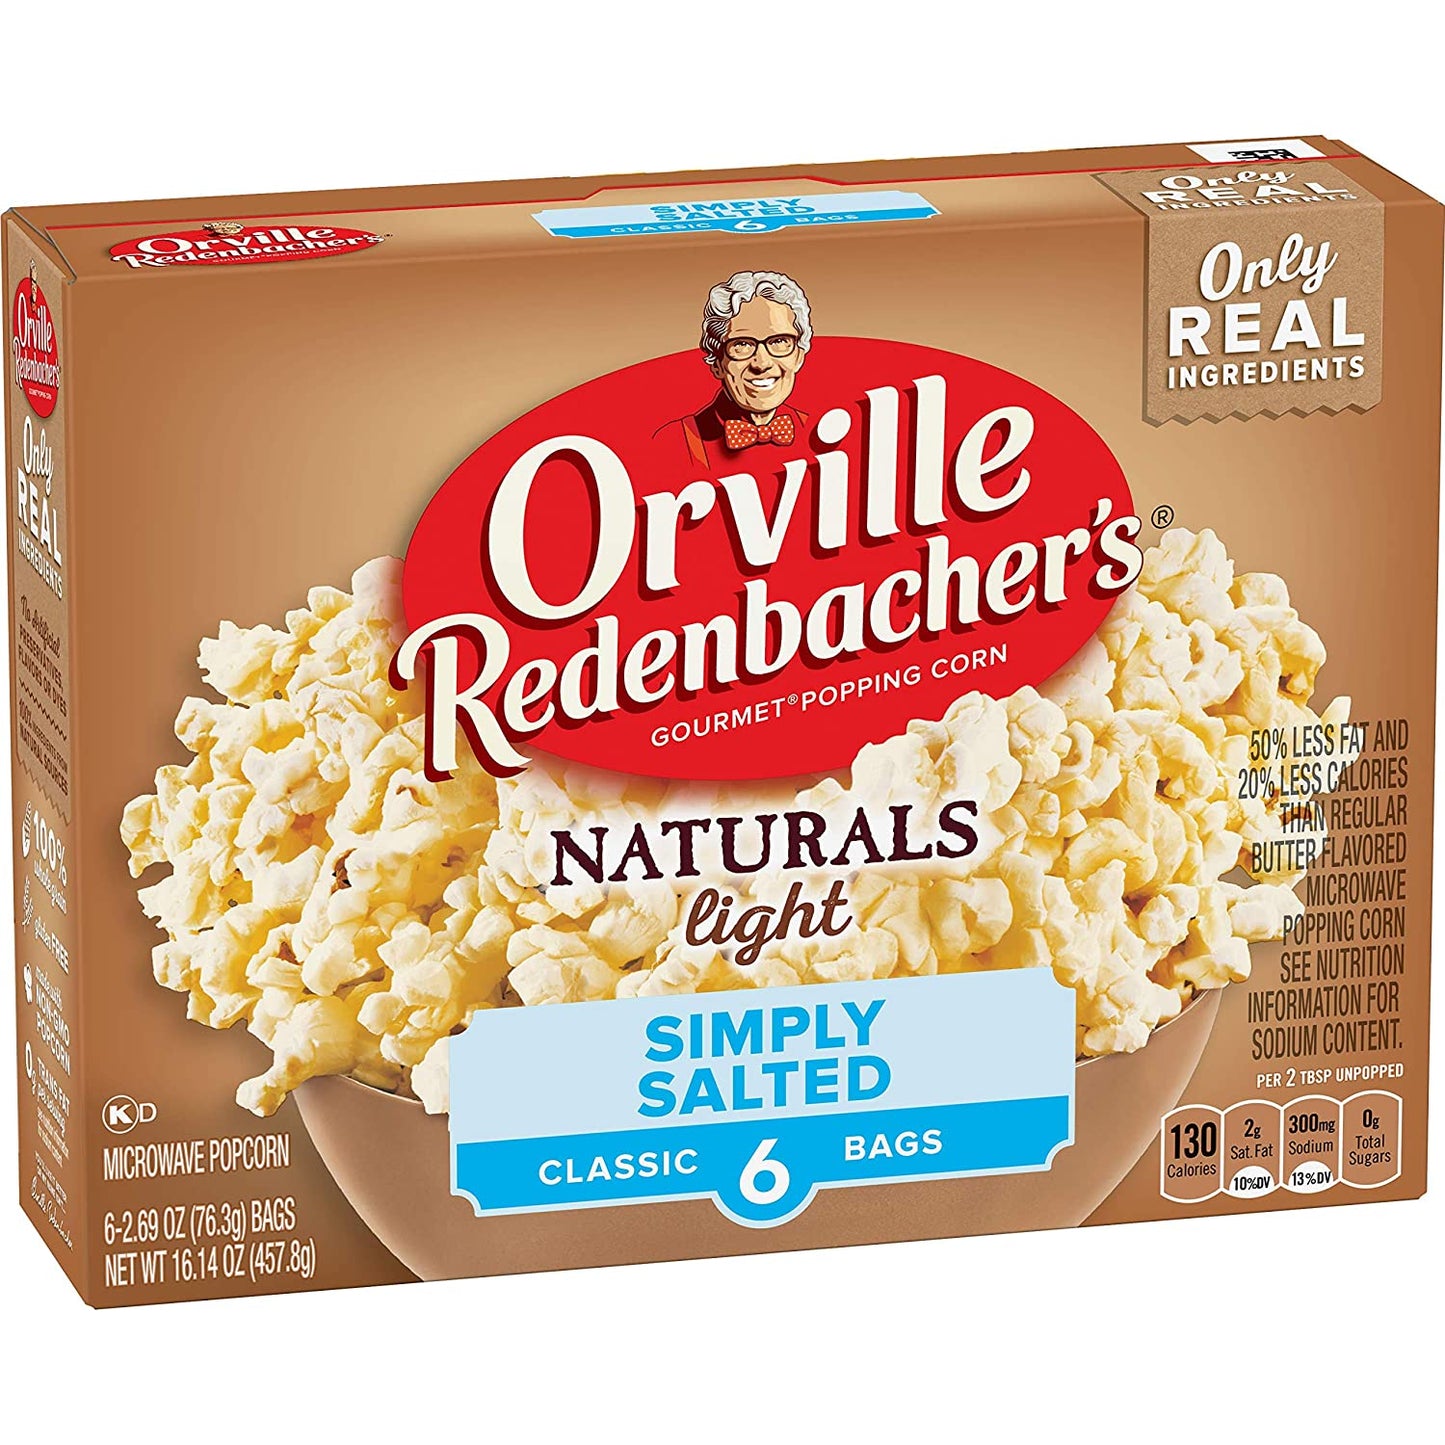 Orville Redenbacher's Salted Popcorn, 6 Count of 2.69 oz Each, 16.14 Ounce